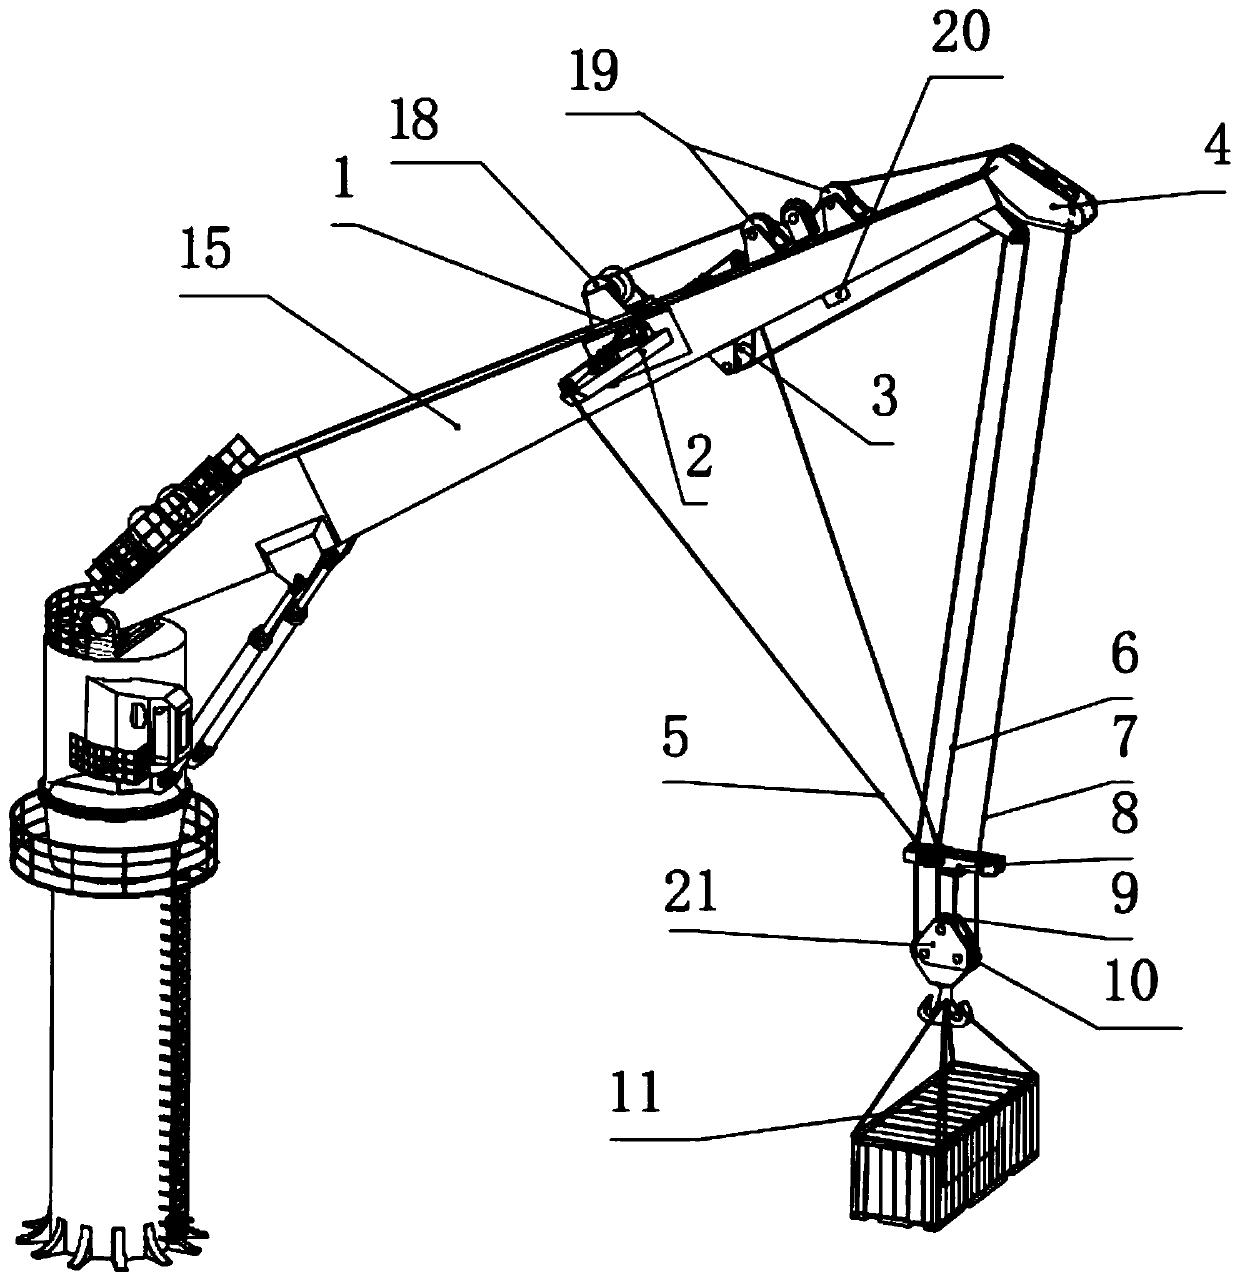 An anti-sway device for a crane